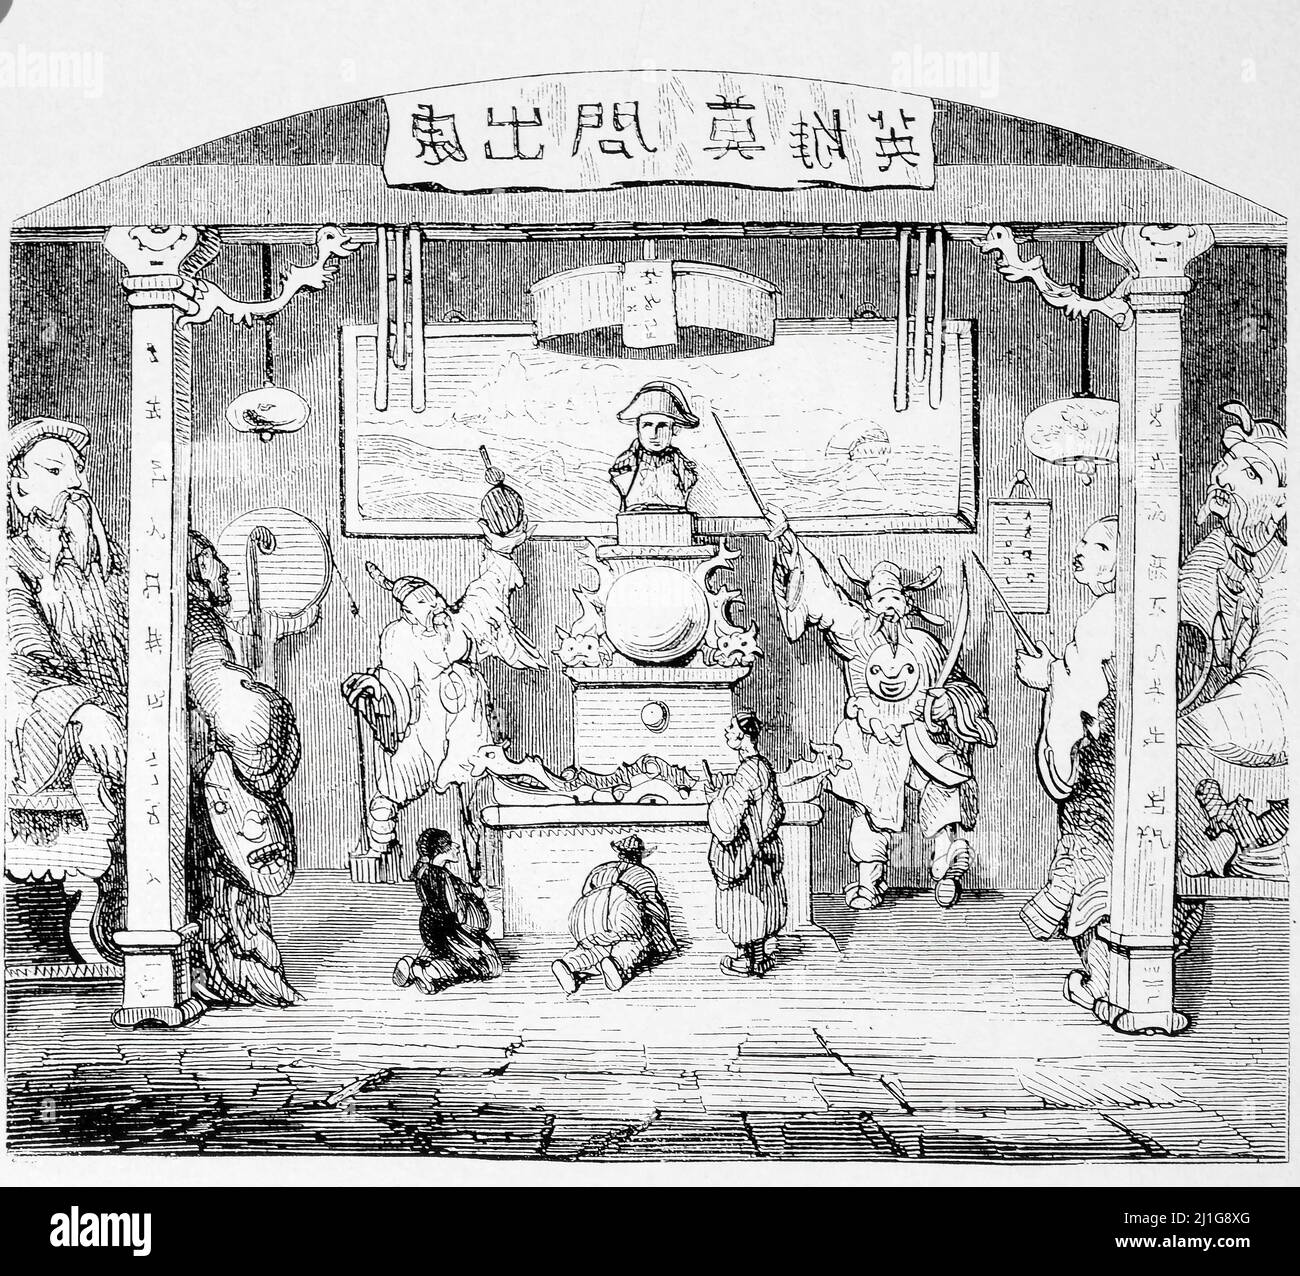 Eng translation : ' Napoleon worshiped in a Chinese temple ' - Original in French : ' Napoléon adoré dans un temple chinois ' - Extract from 'L'Illustration Journal Universel' - French illustrated magazine - 1843 Stock Photo